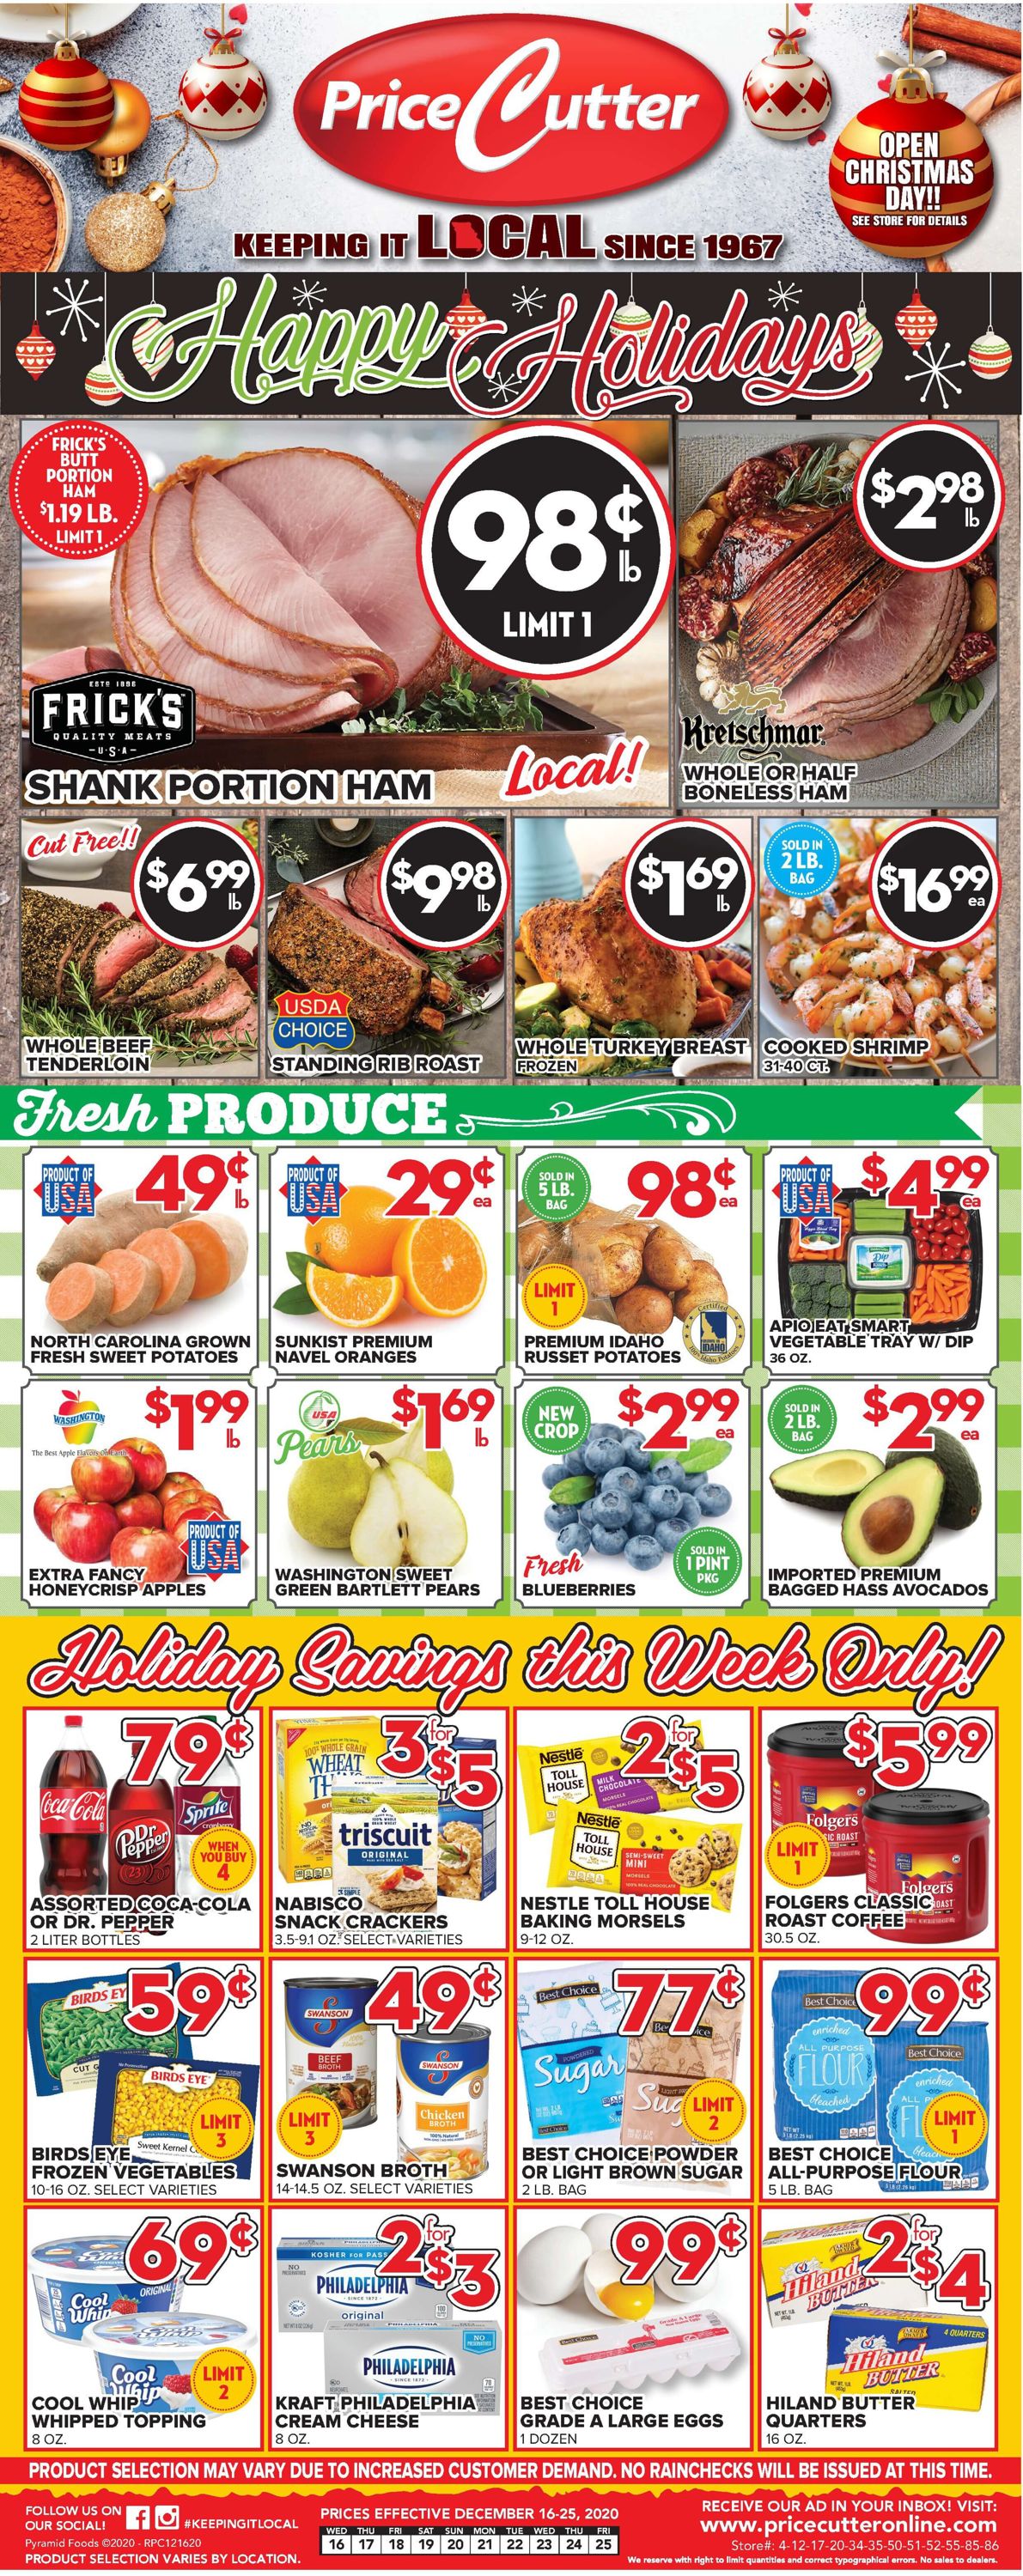 Price Cutter Christmas Ad 2020 Weekly Ad Circular - valid 12/16-12/25/2020